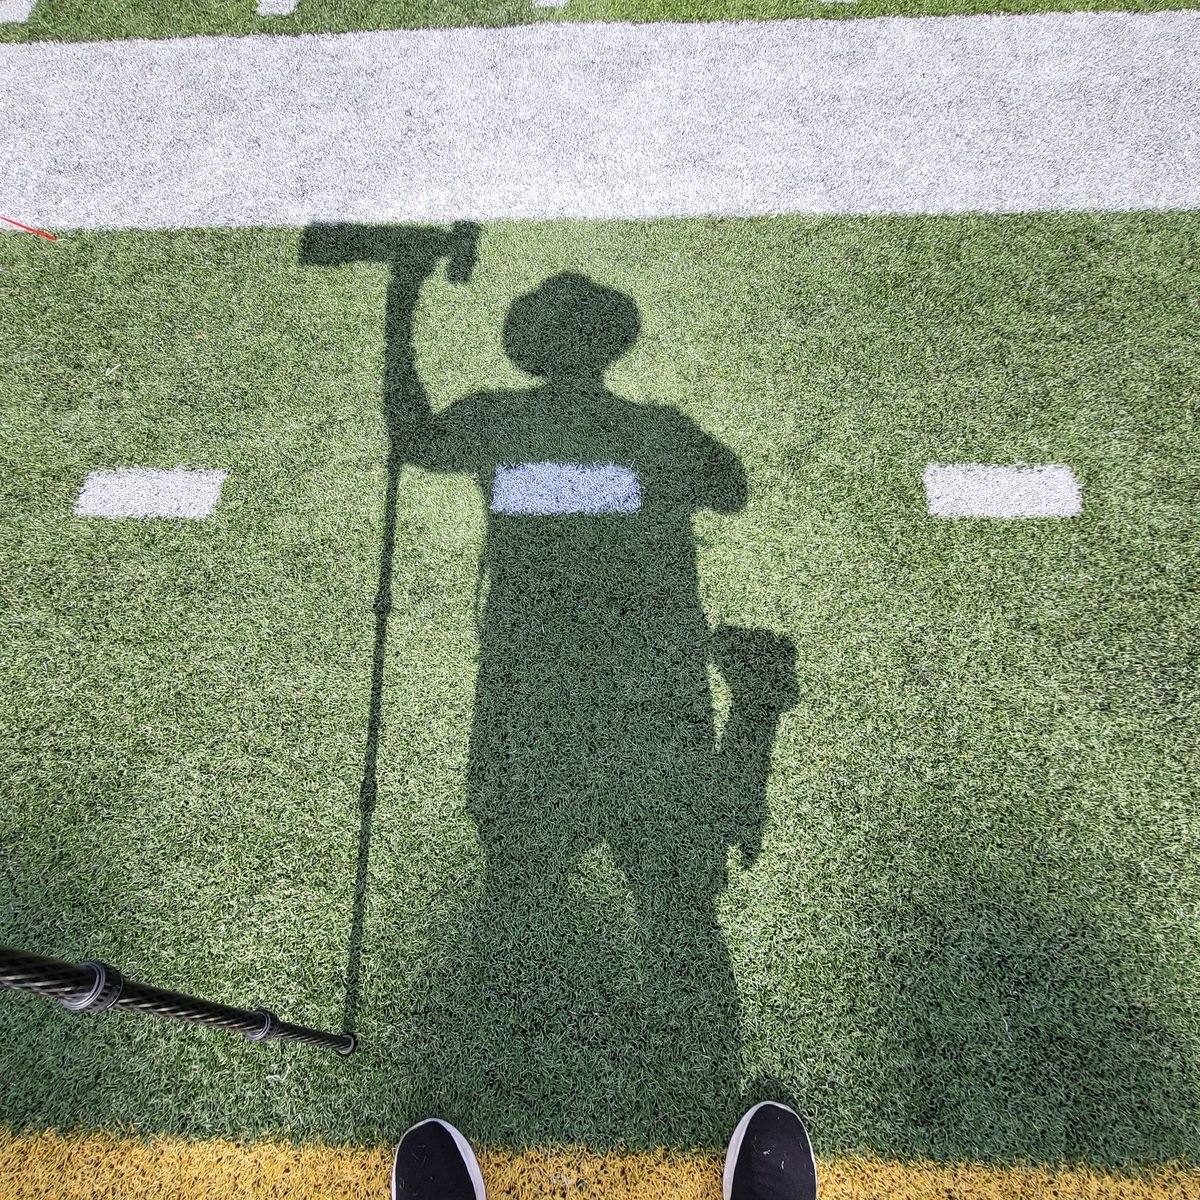 My typical silhouette this time of year....IYKYK. 
#sportsphotographer #footballphotographer #soccerphotographer #fieldhockeyphotographer #rugbyphotographer